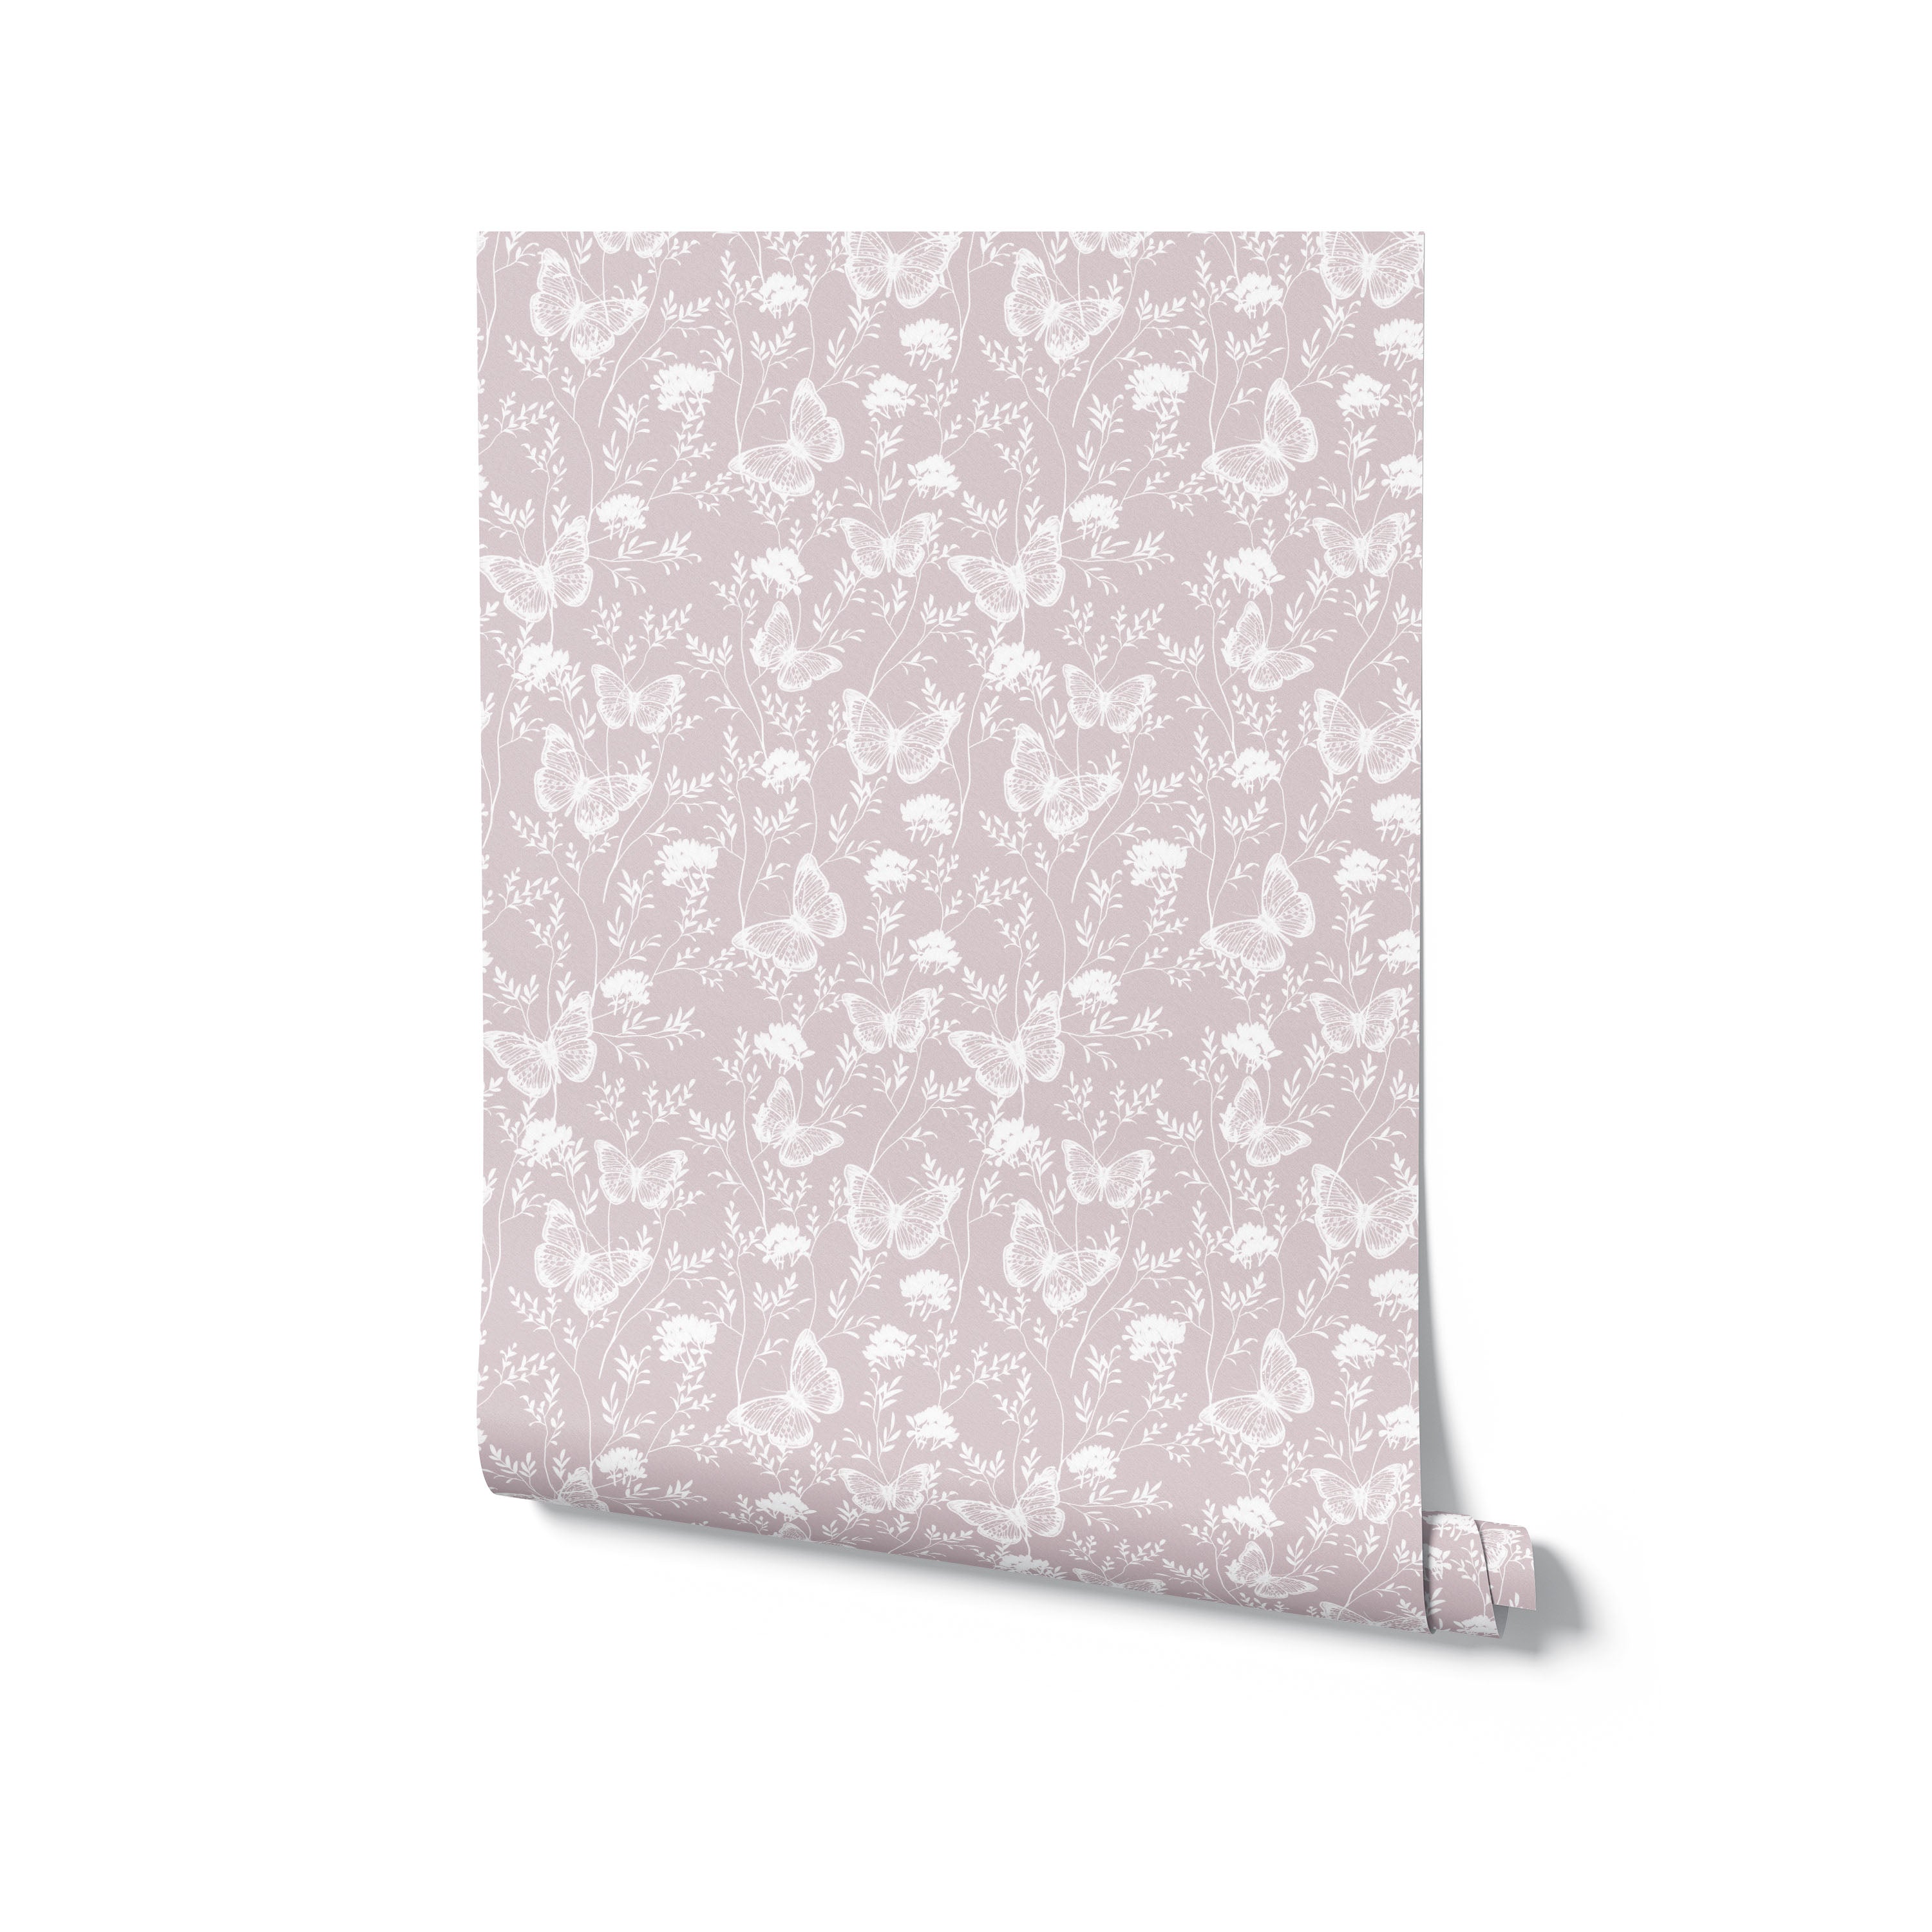 a roll of the "Whimsical Wings Wallpaper," partially unrolled to reveal the charming butterfly and floral pattern on a mauve-pink background. This image showcases the wallpaper's pattern continuity and the romantic, soft ambiance it's designed to create.